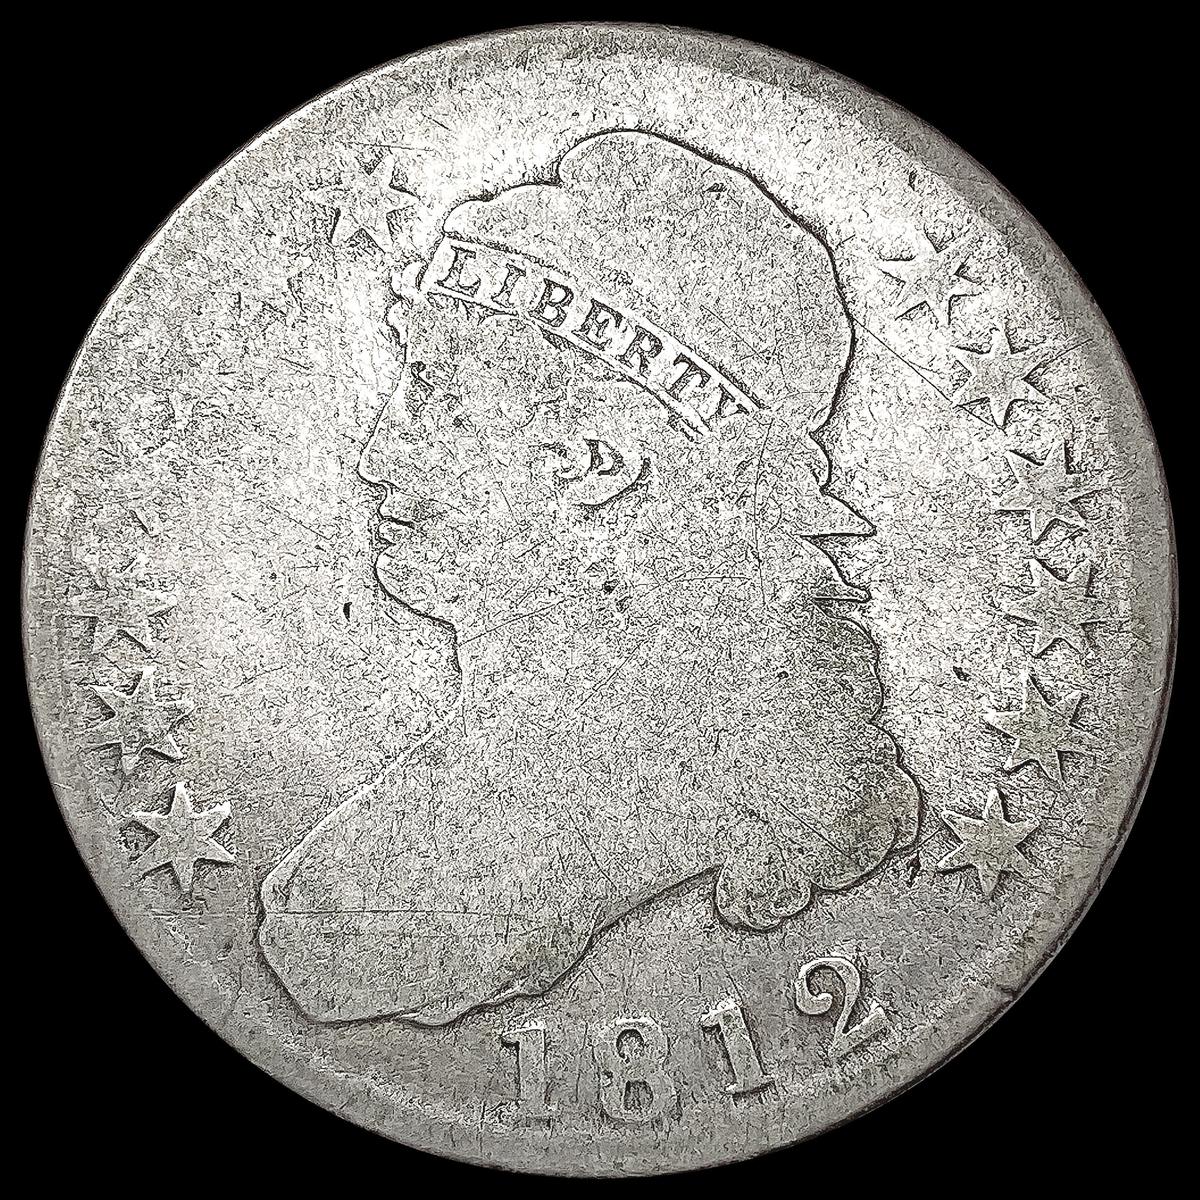 1812 Capped Bust Half Dollar NICELY CIRCULATED